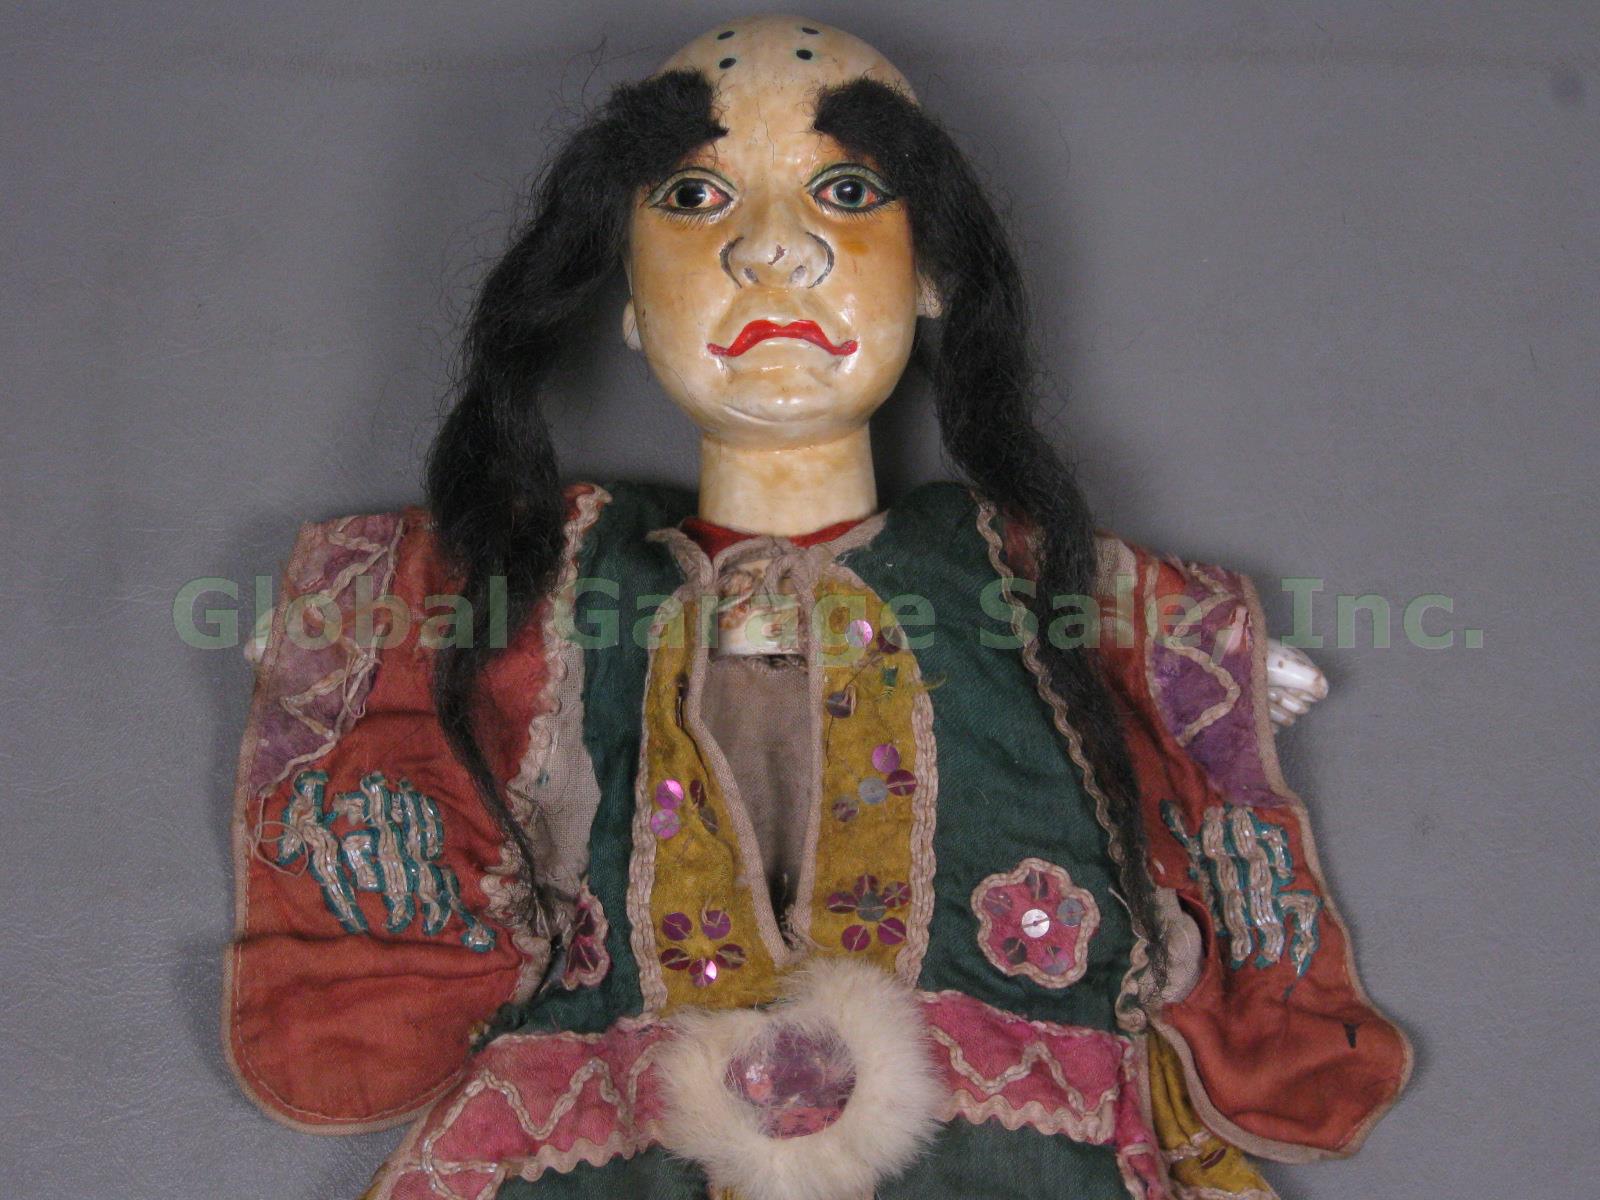 Antique Chinese 16" Puppet Doll Marionette Wooden Head Silk Clothing Human Hair? 1